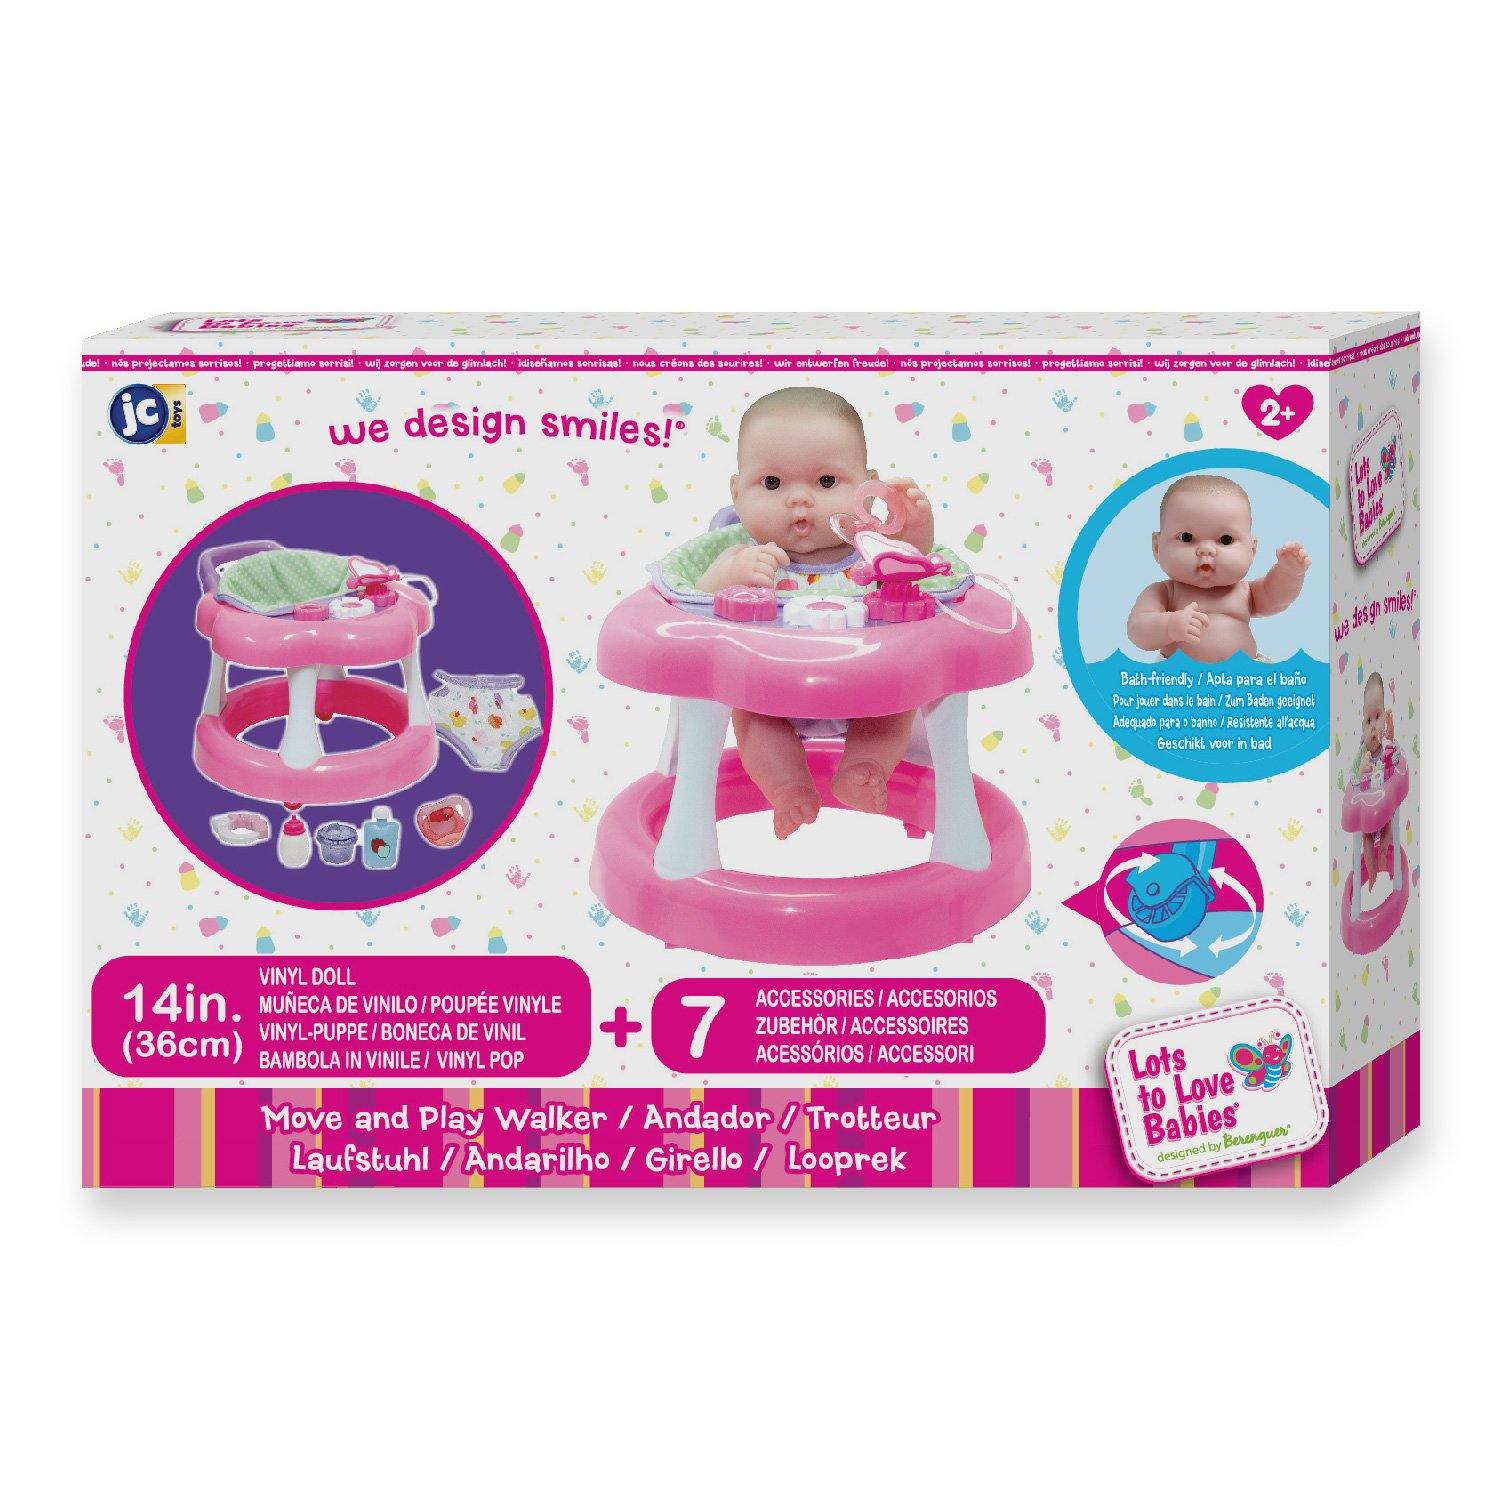 JC Toys, Lots to Love Babies All-Vinyl 14 inches Baby Doll in Walker with  Accessories